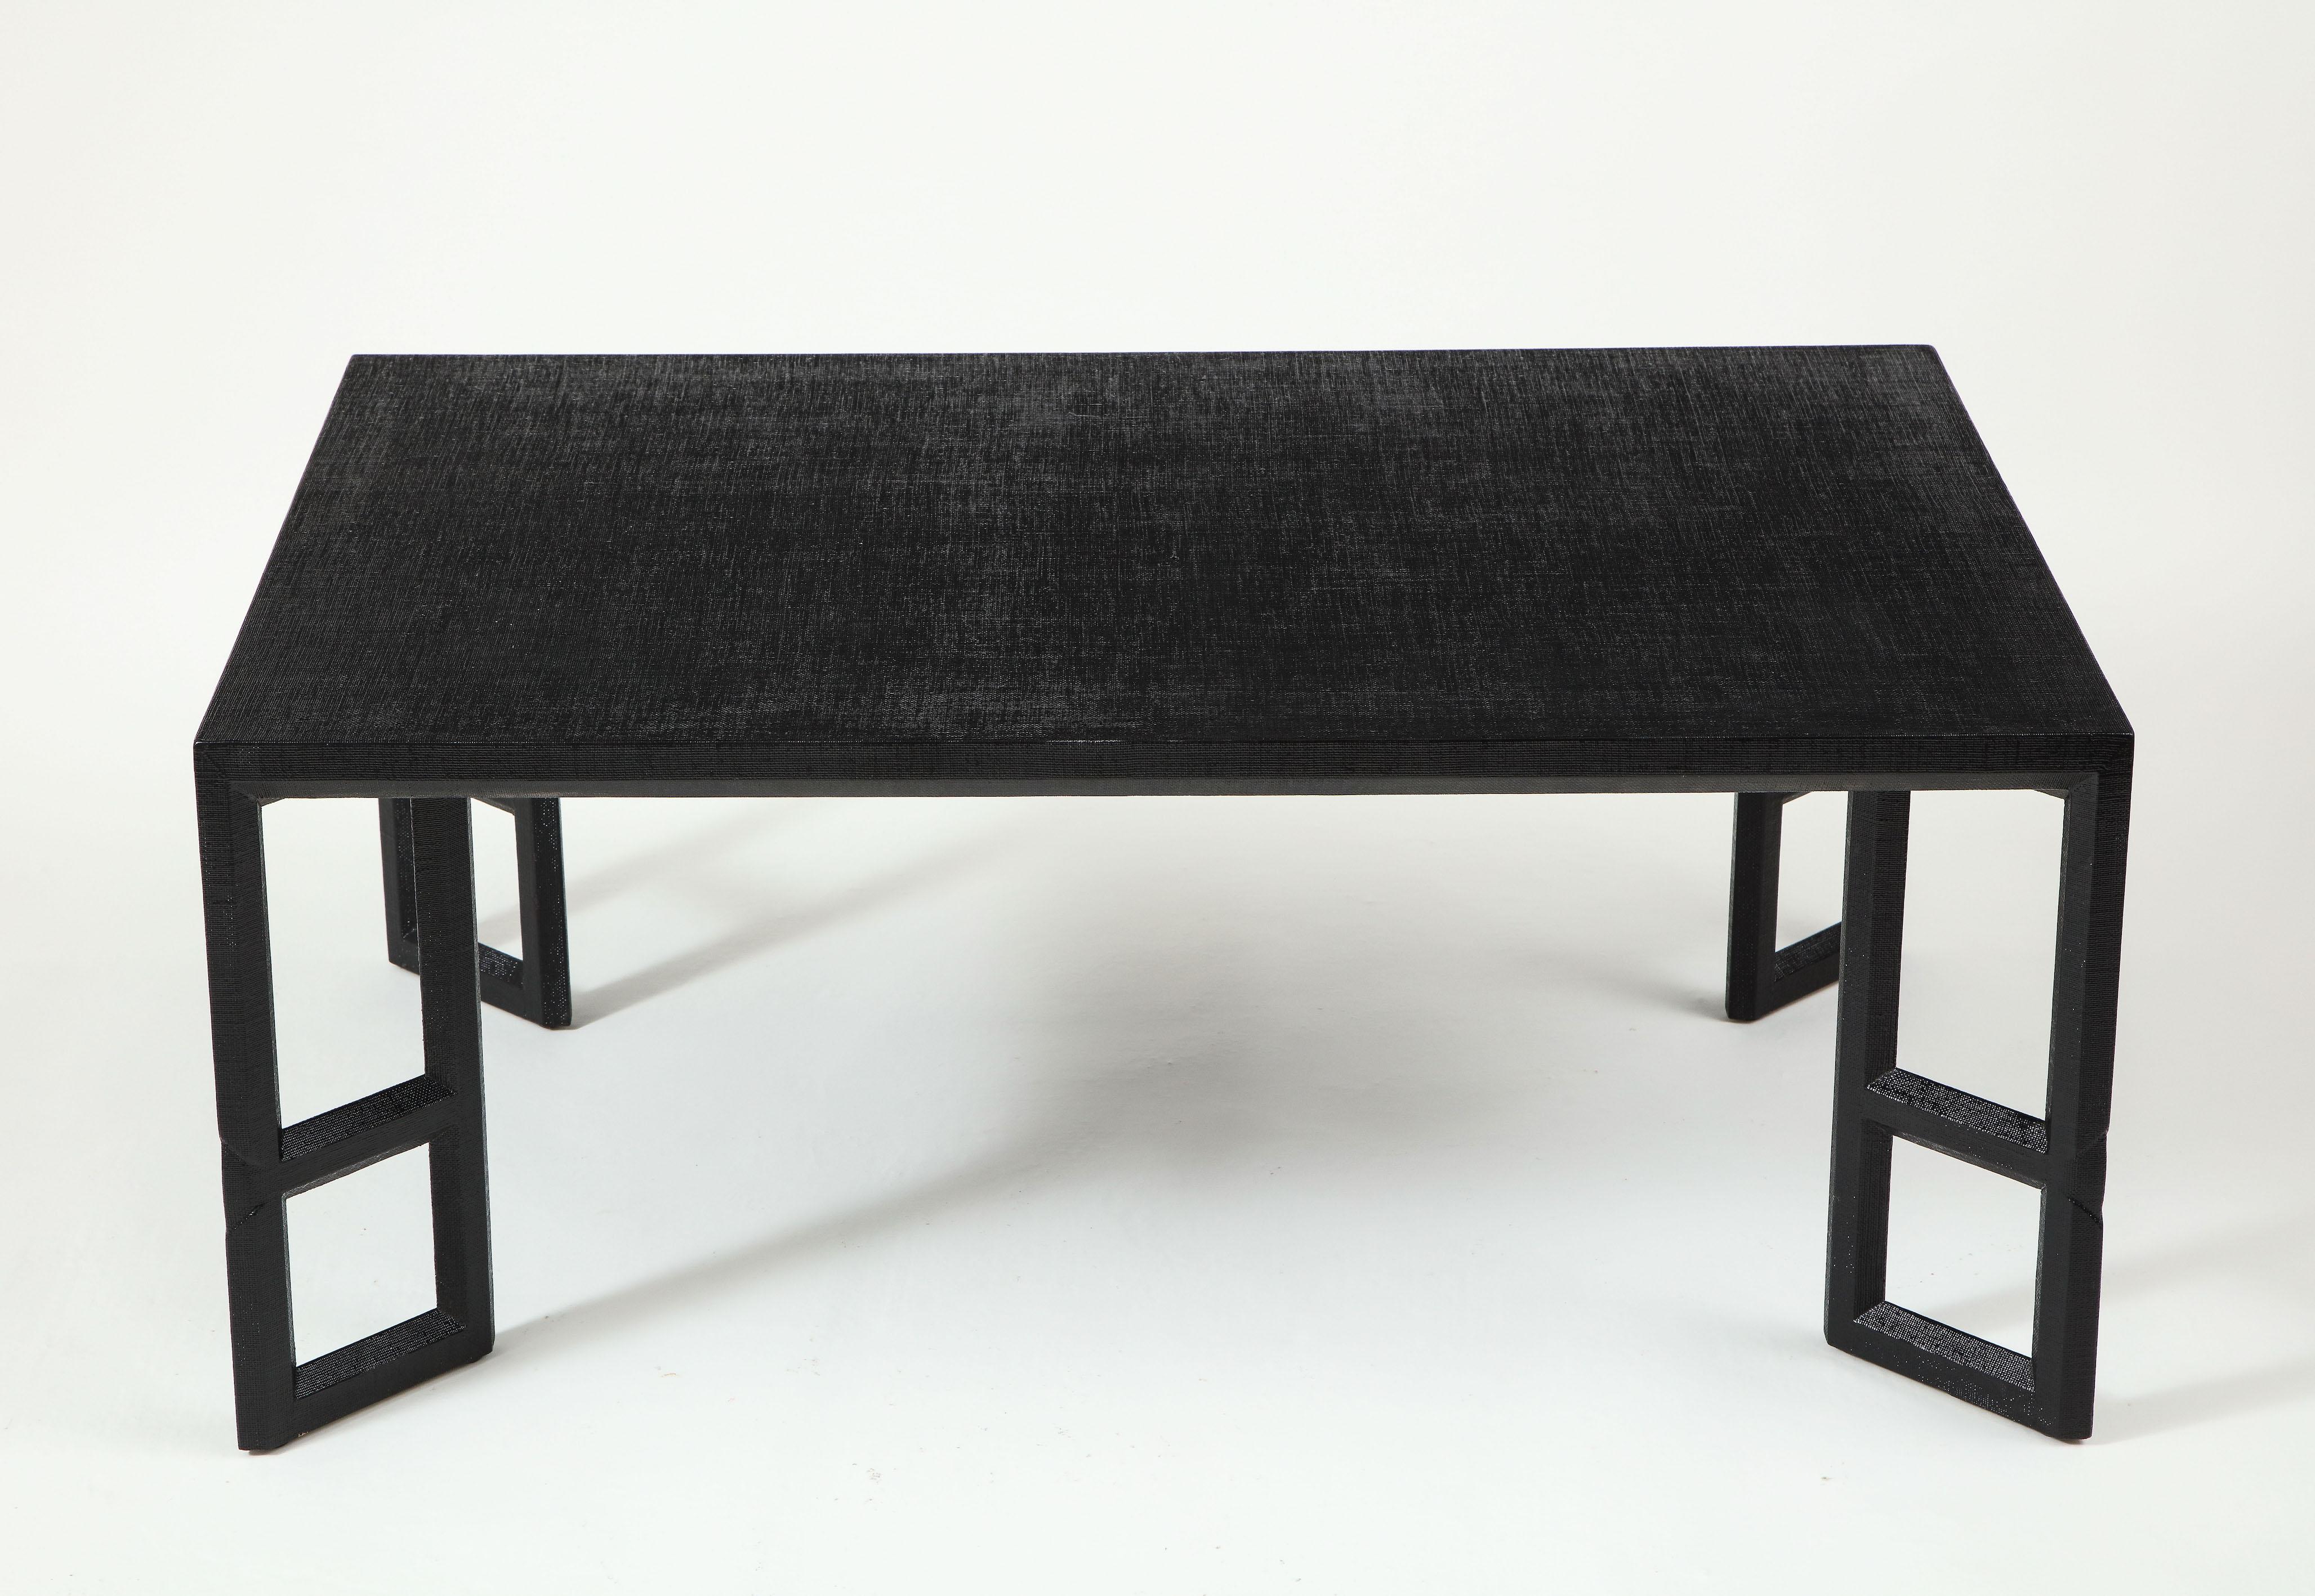 The rectangular top raised on angled open supports, all wrapped in black-painted linen.